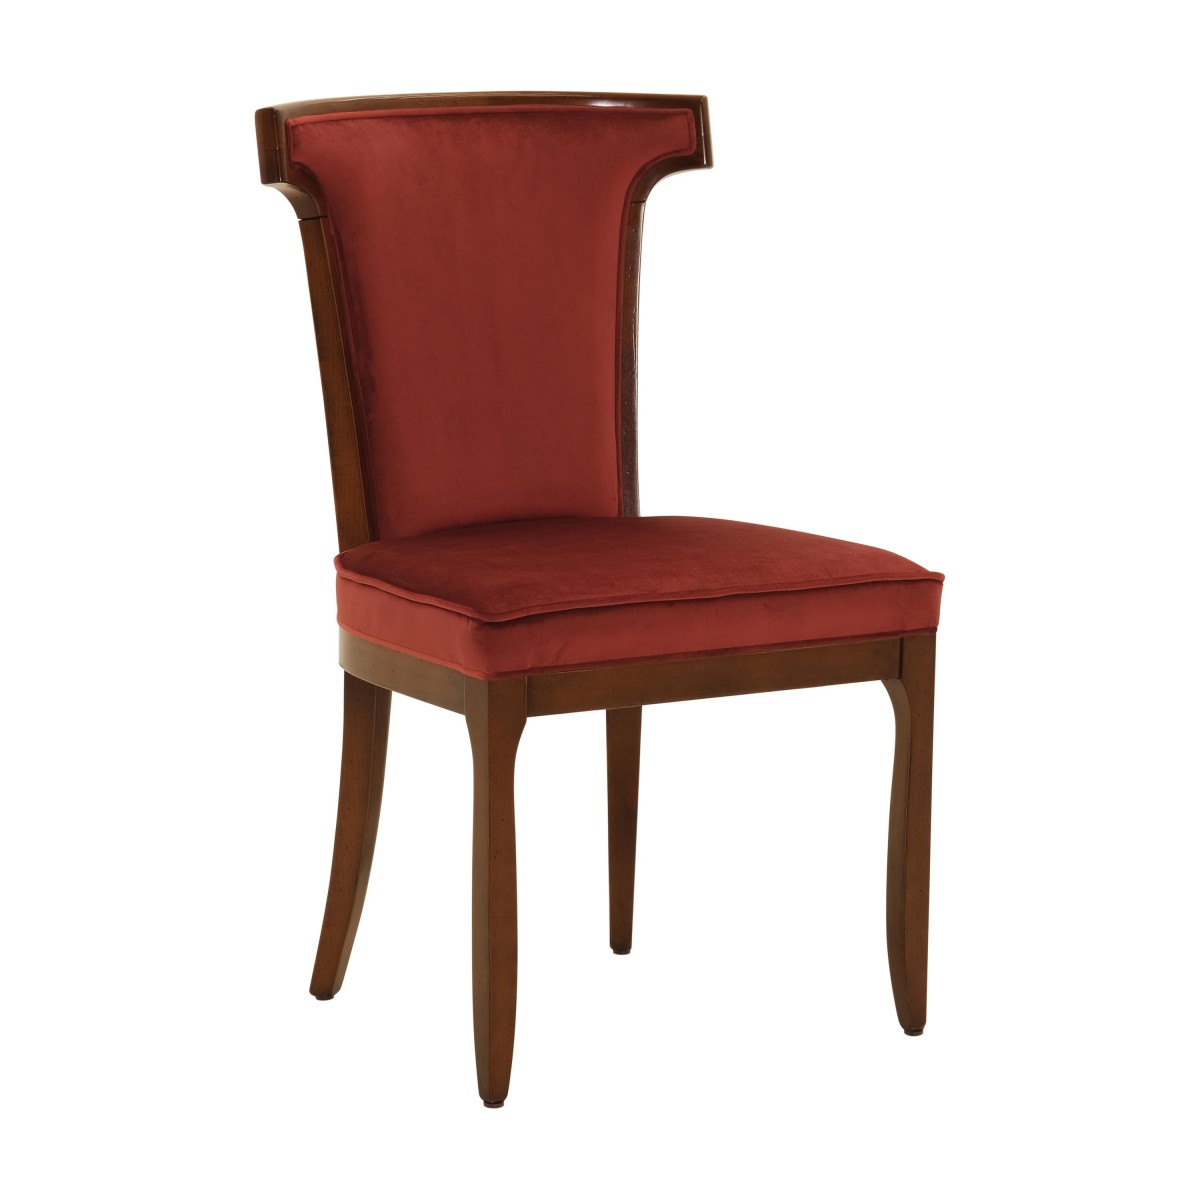 contemporary chair london 1808